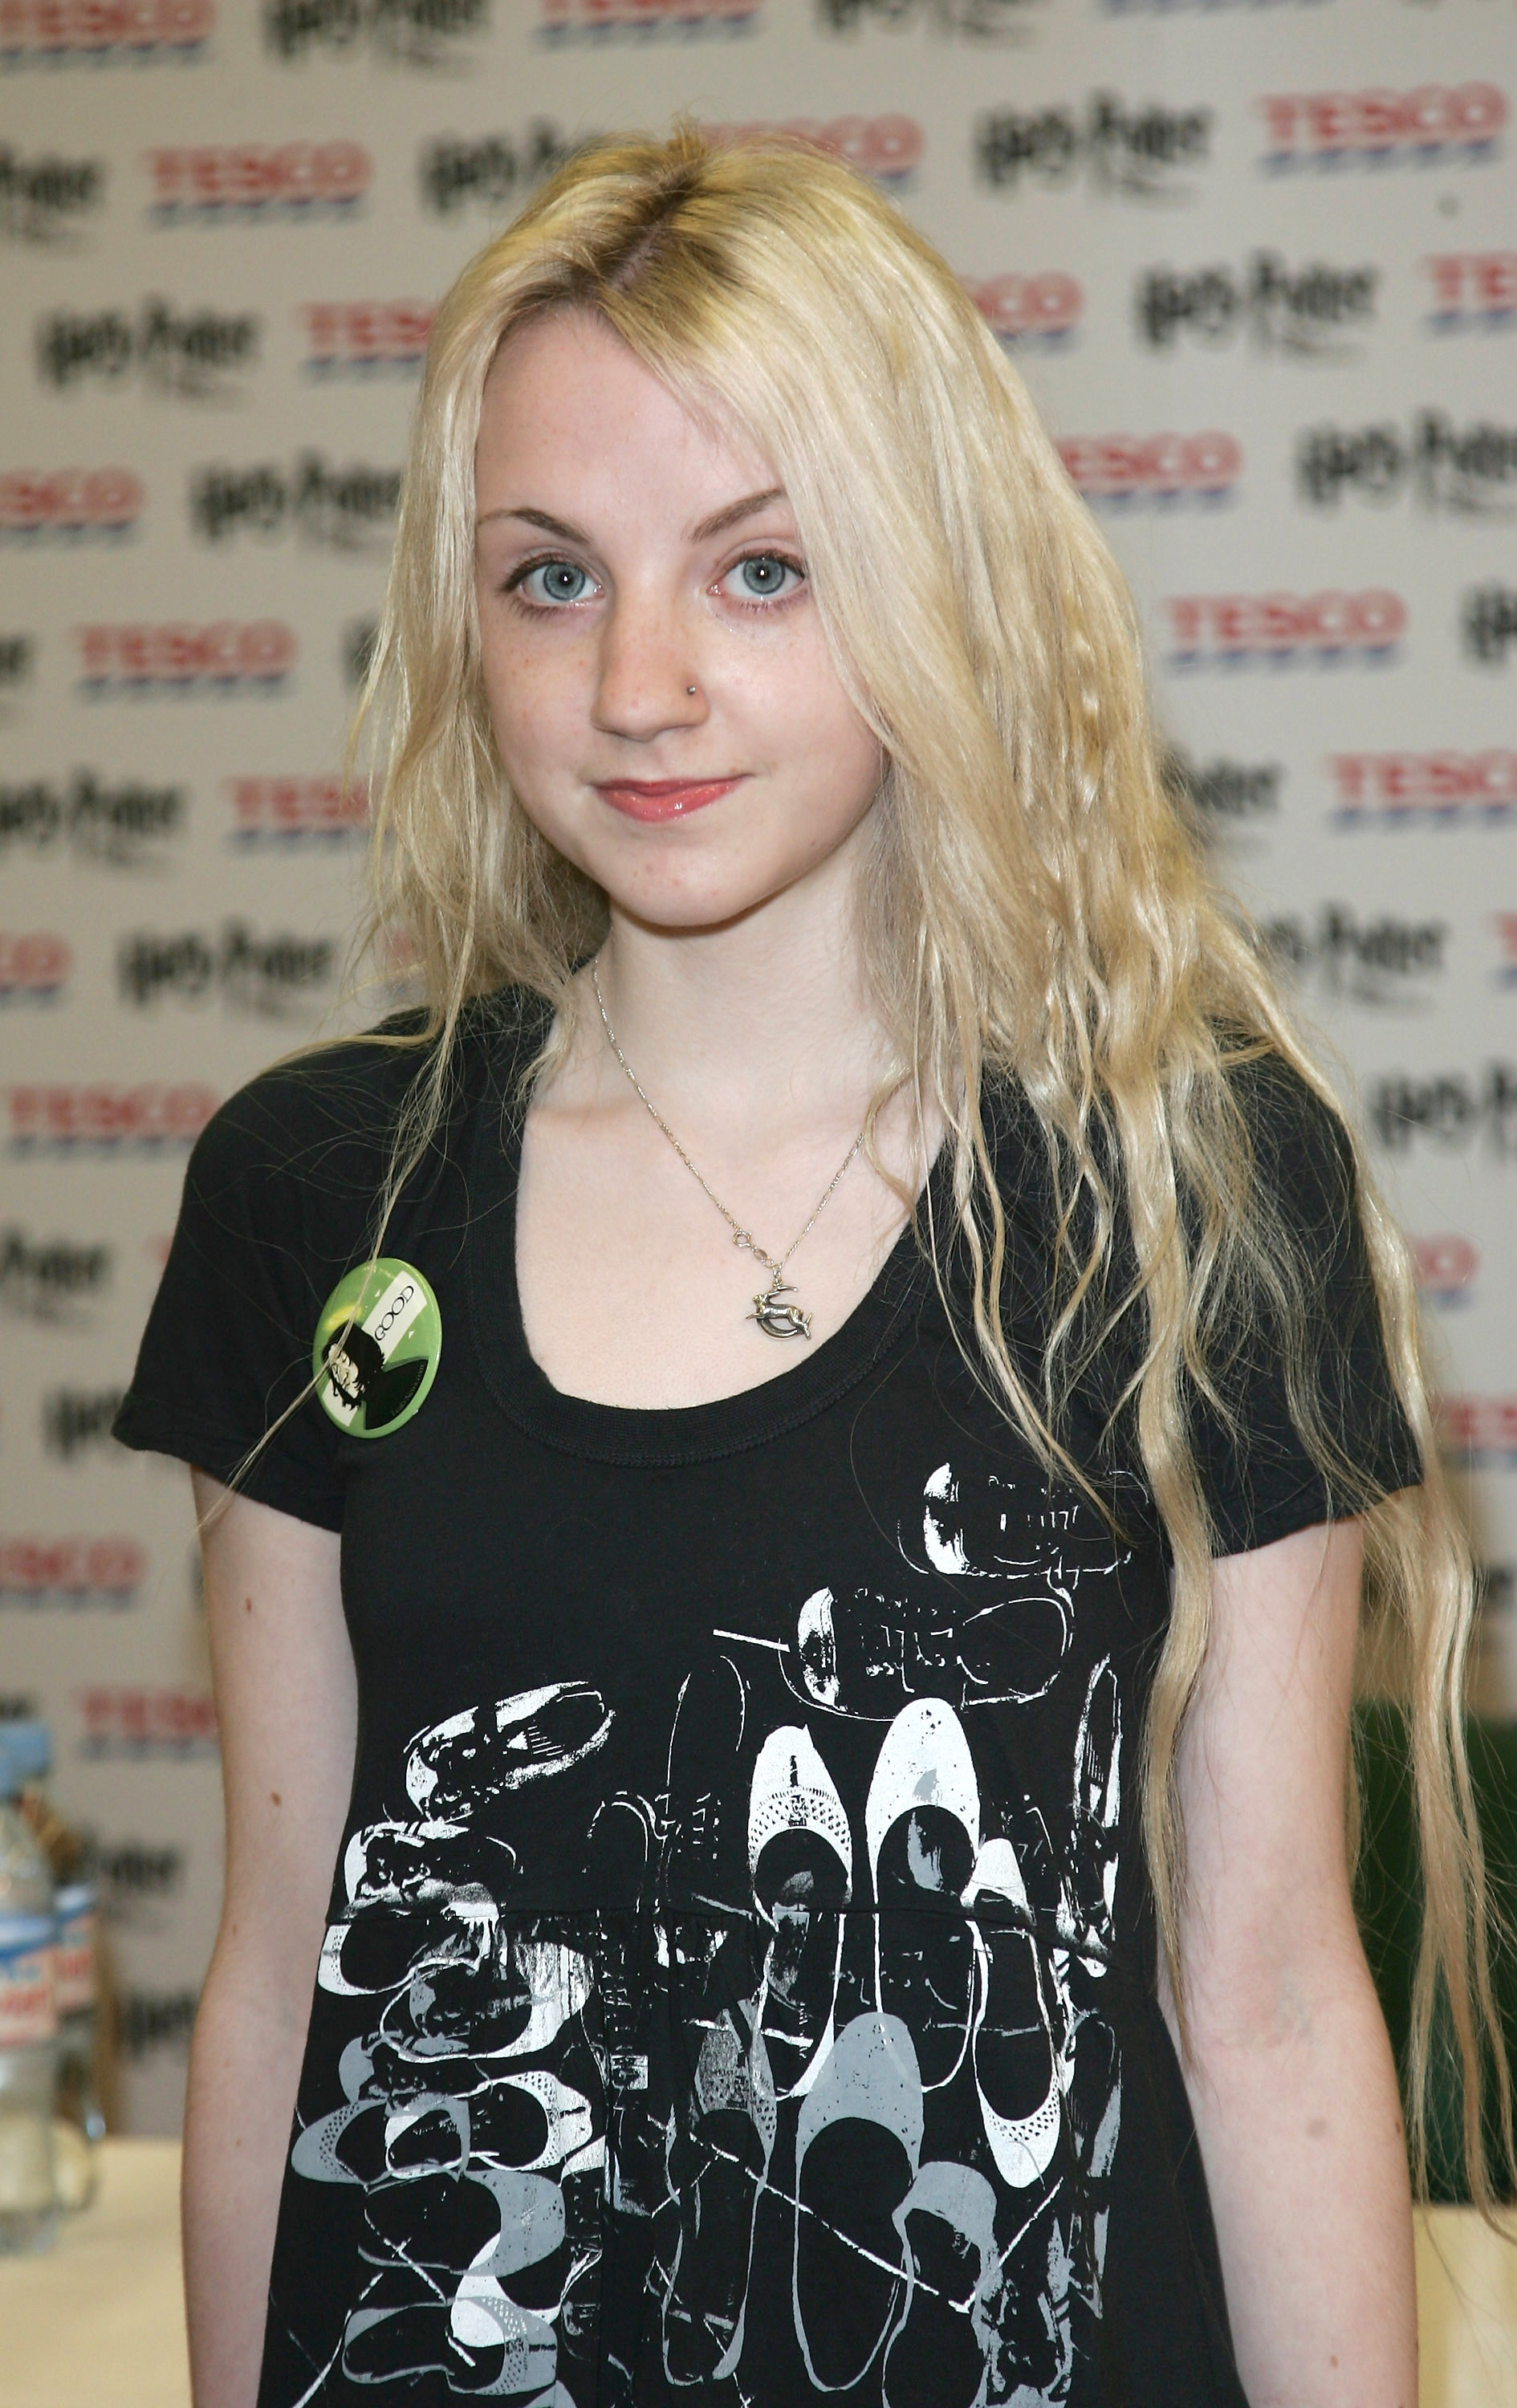 Evanna Lynch poses at a photocall for "Harry Potter and the Order of the Phoenix" at a Tesco Extra store on July 14, 2007 in Watford, England. | Source: Getty Images